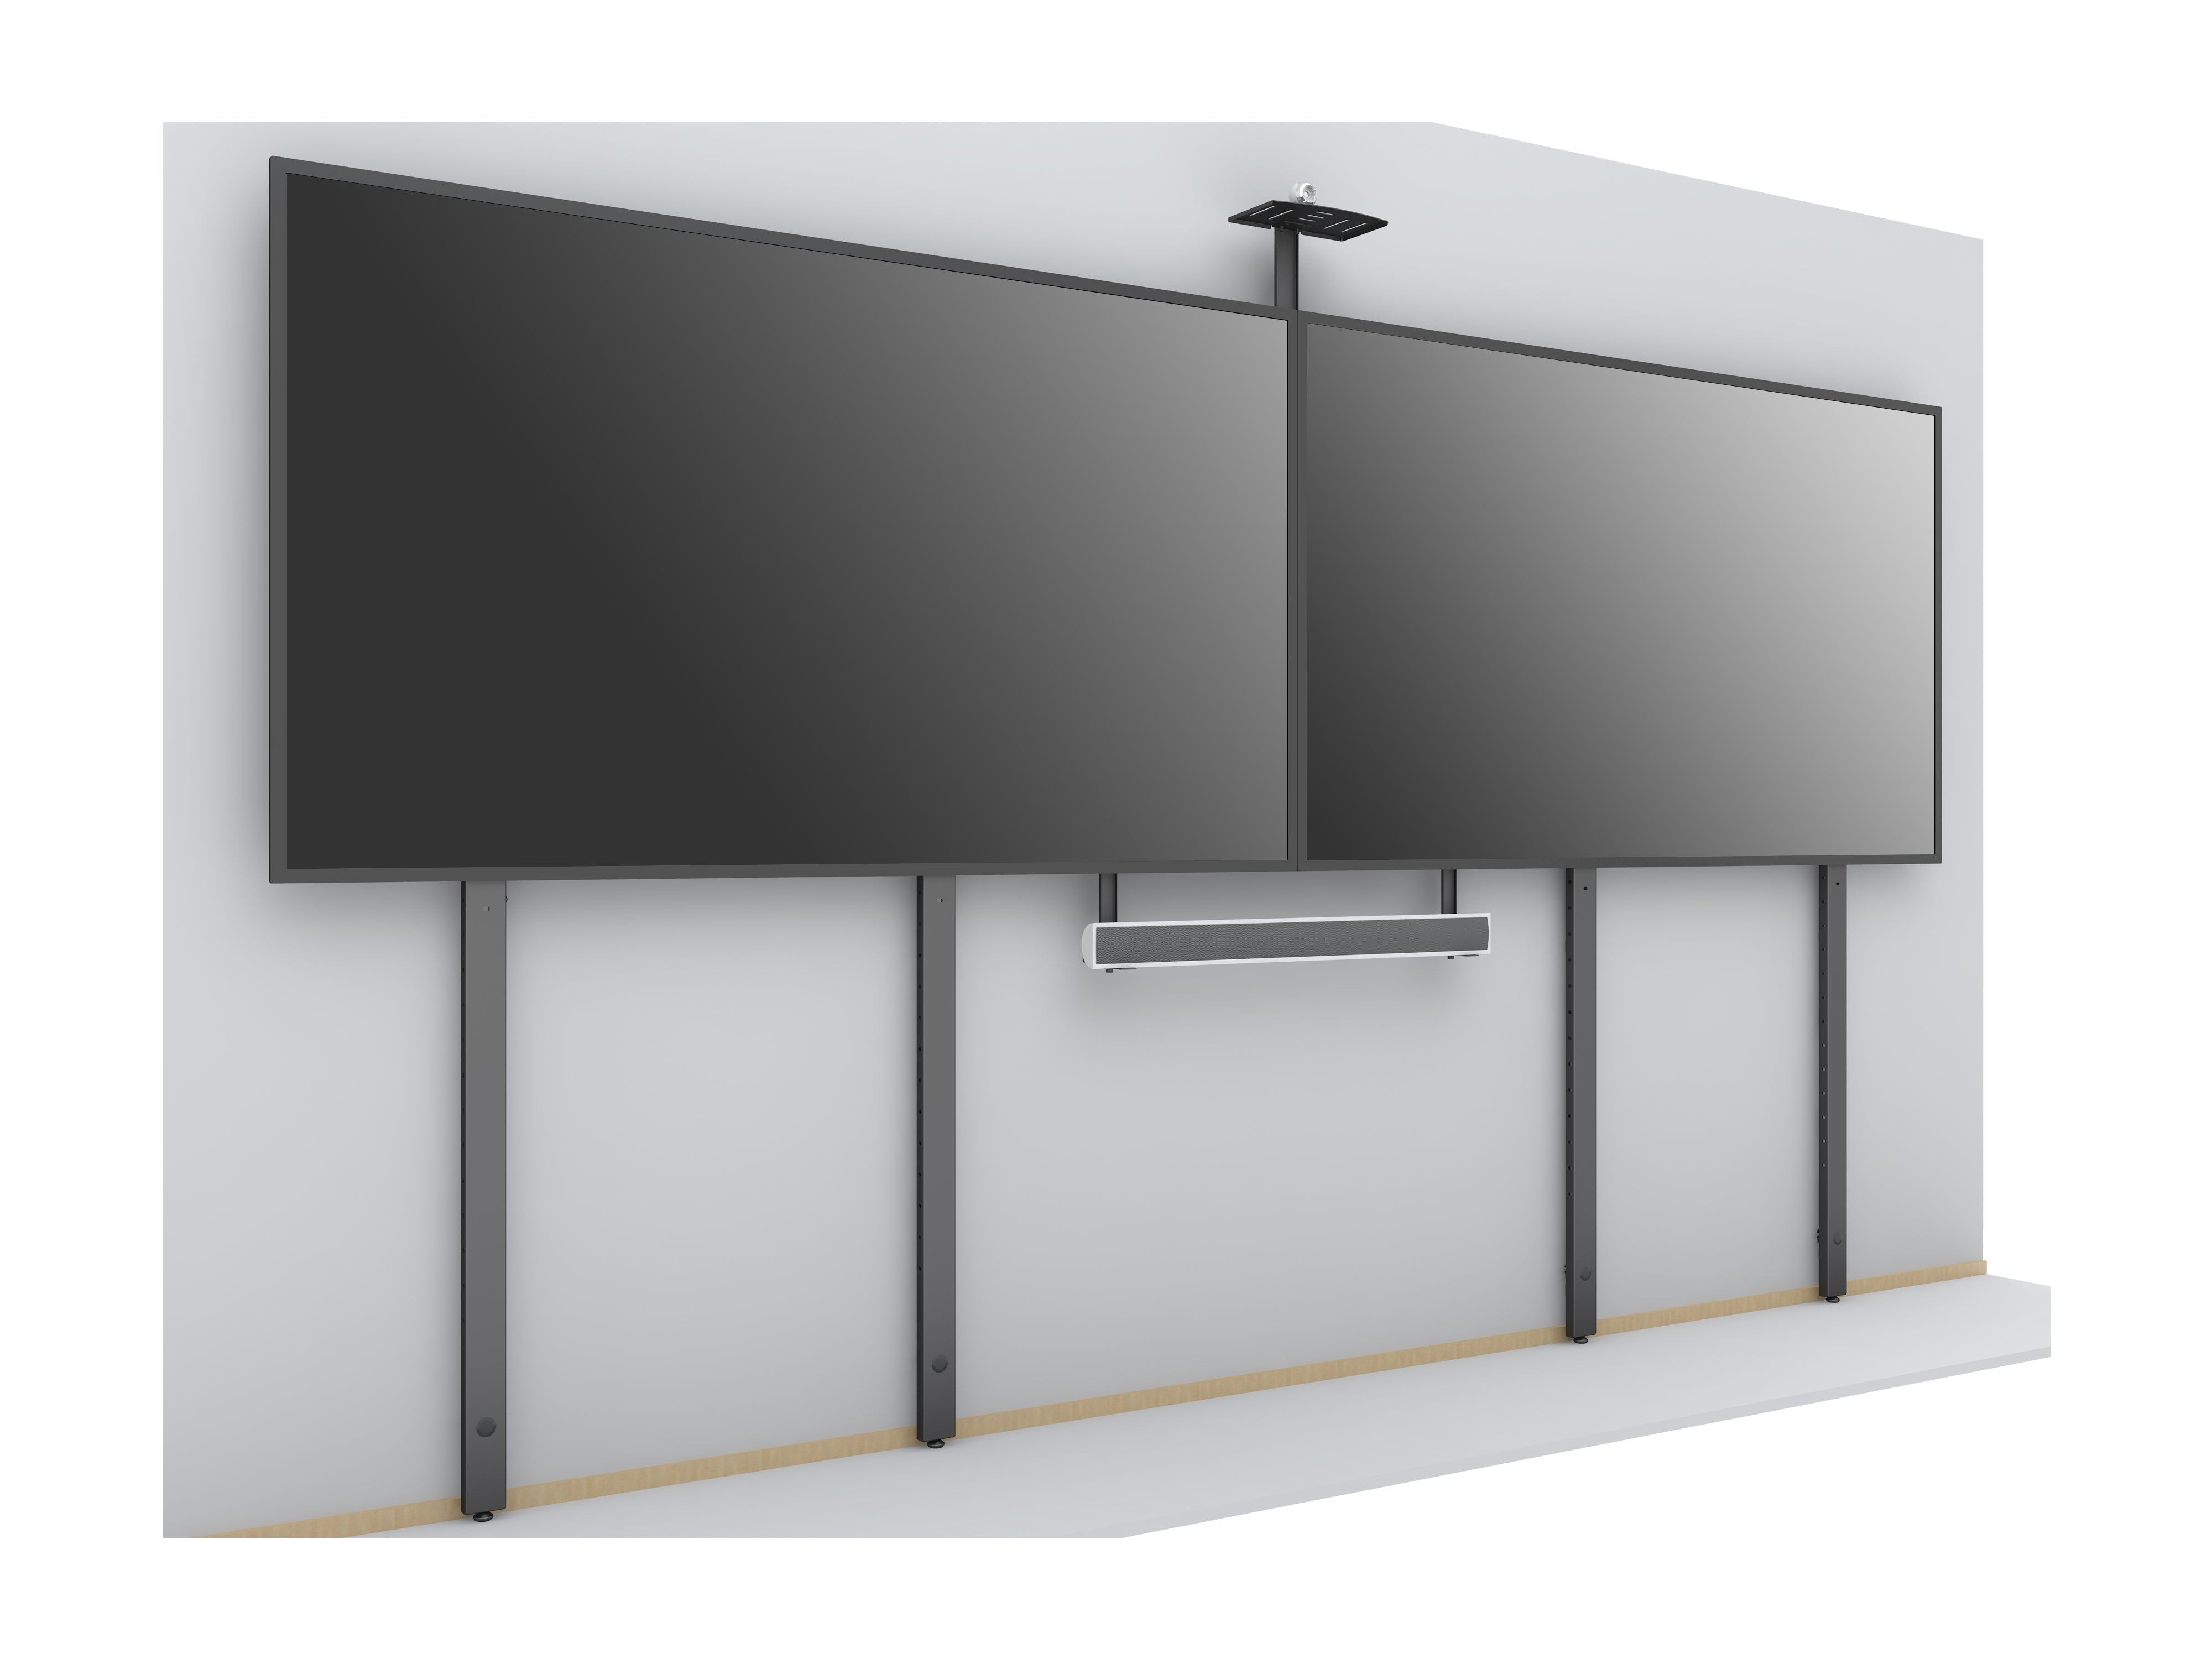 Dual-Screen Video Conference Mount System with Soundbar & Camera Shelf (up to 90" screens)